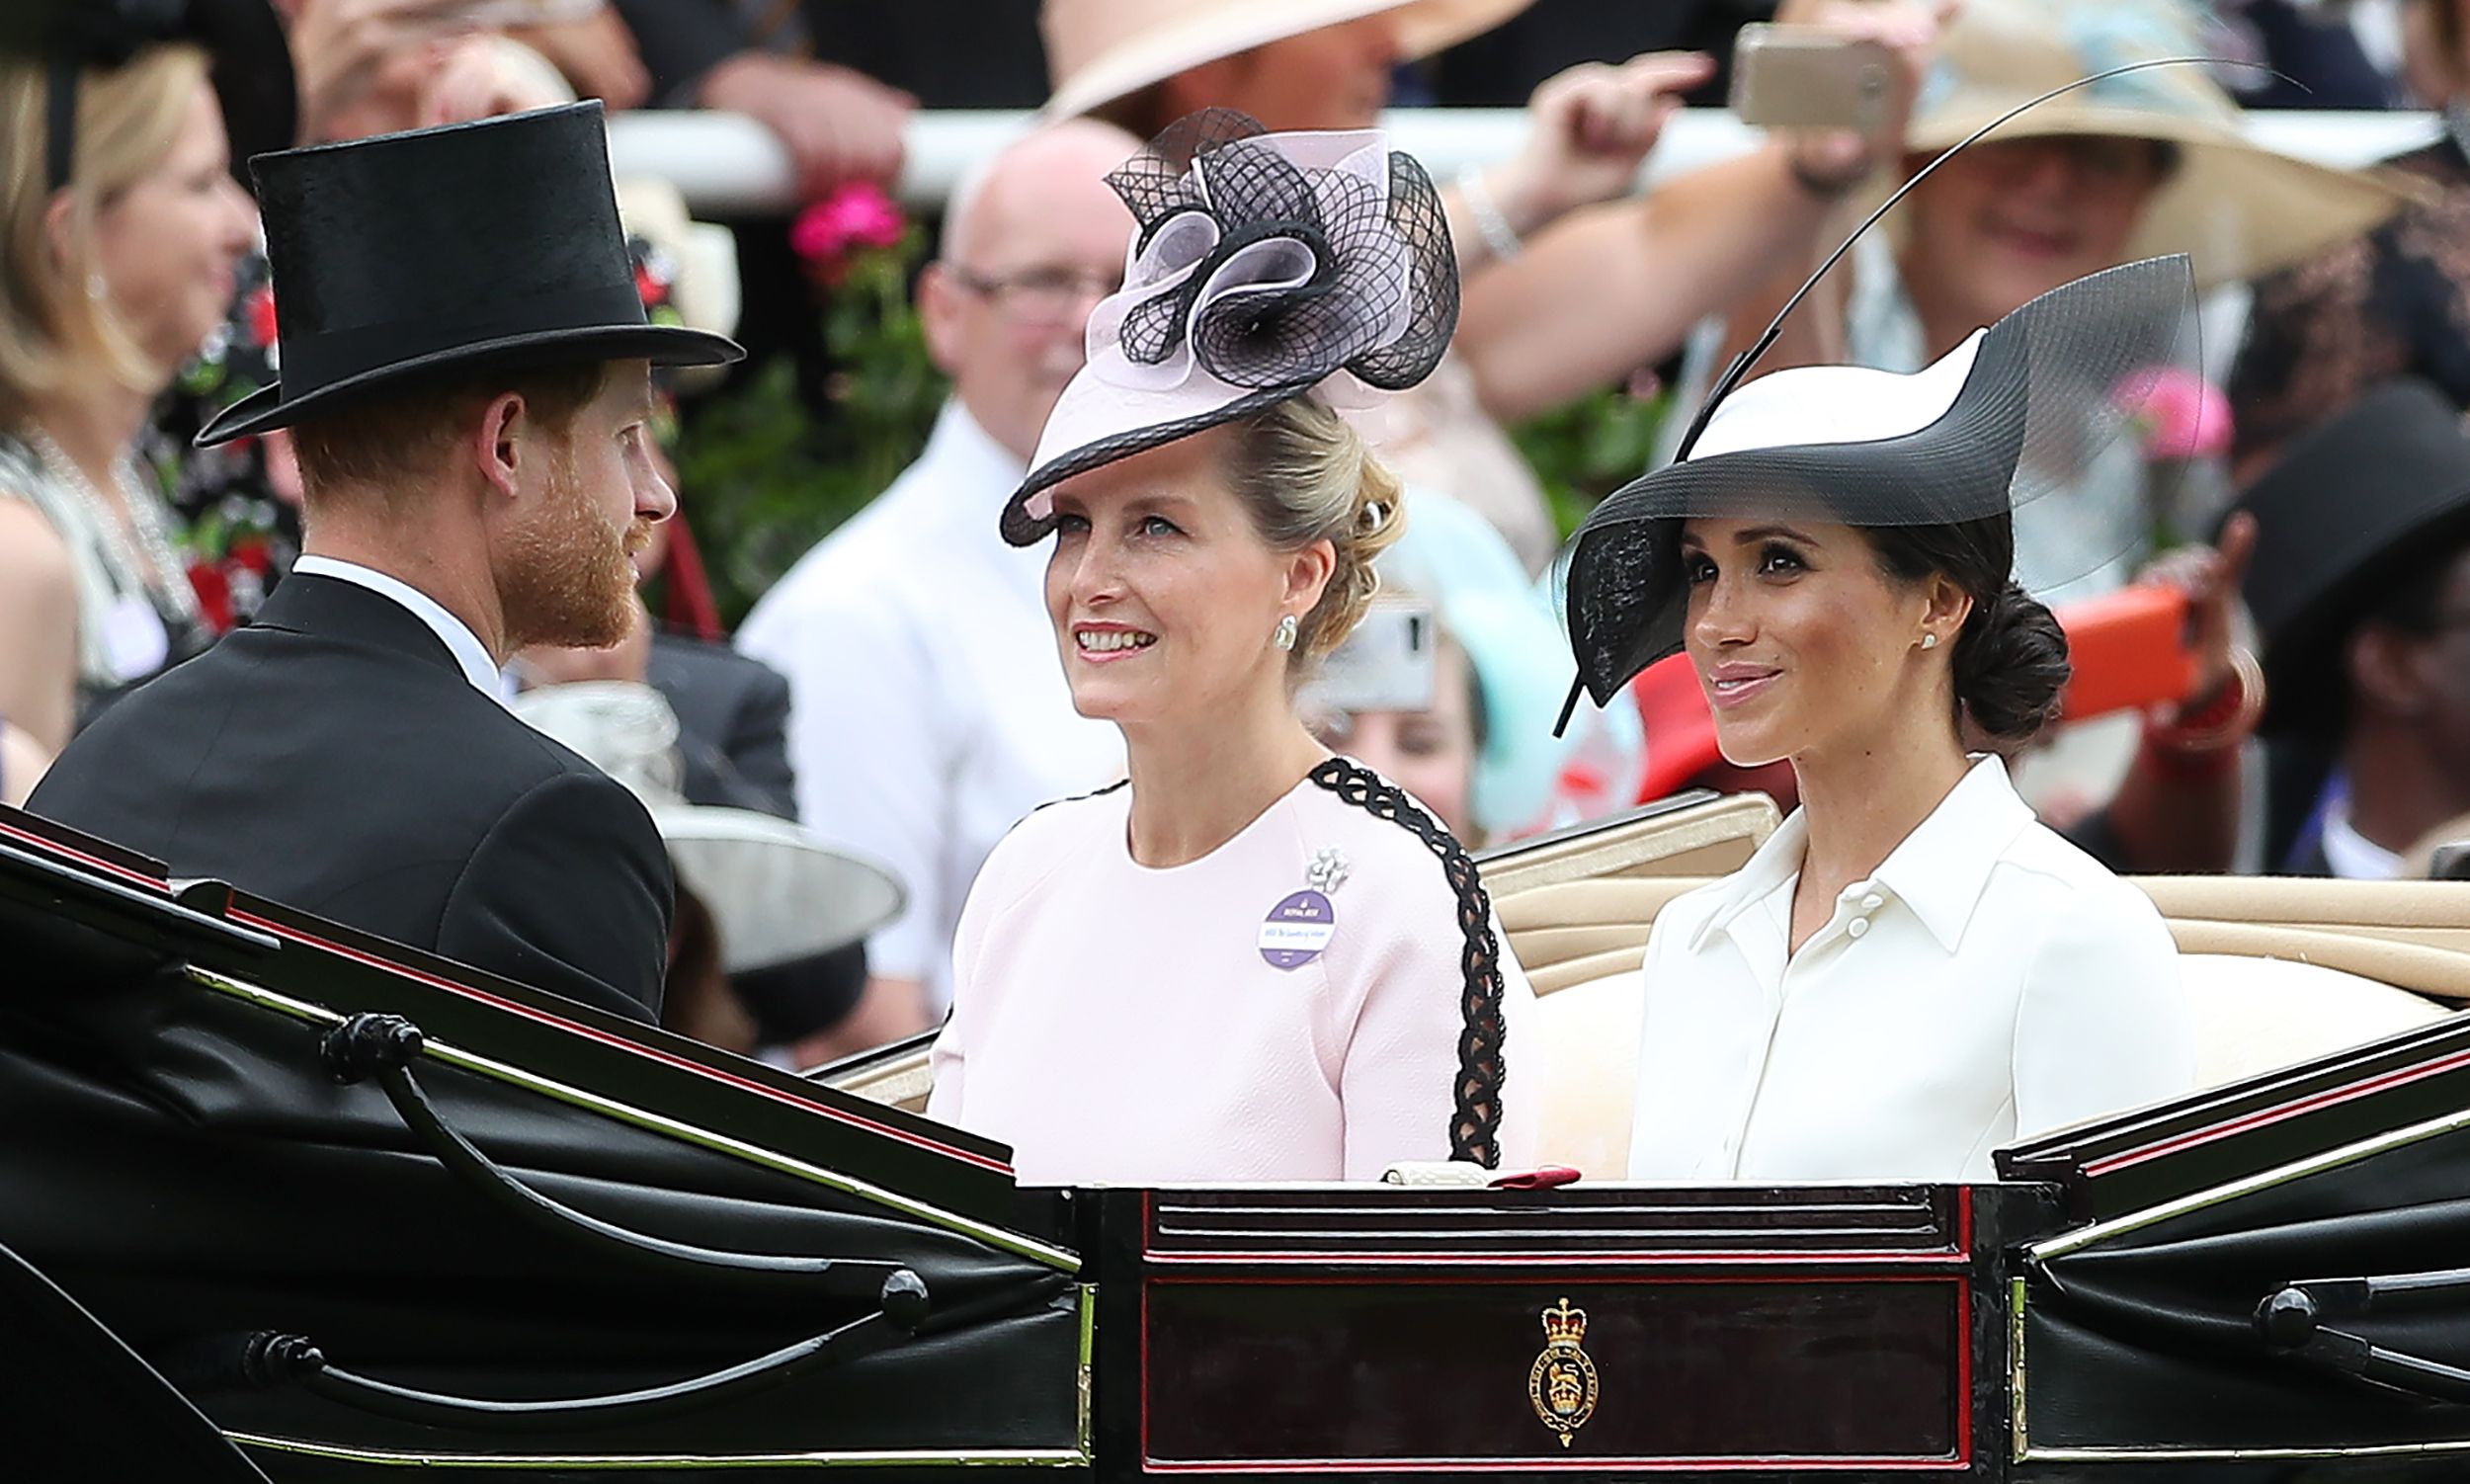 Royal Ascot Rules, Facts, and History - What to Know Before